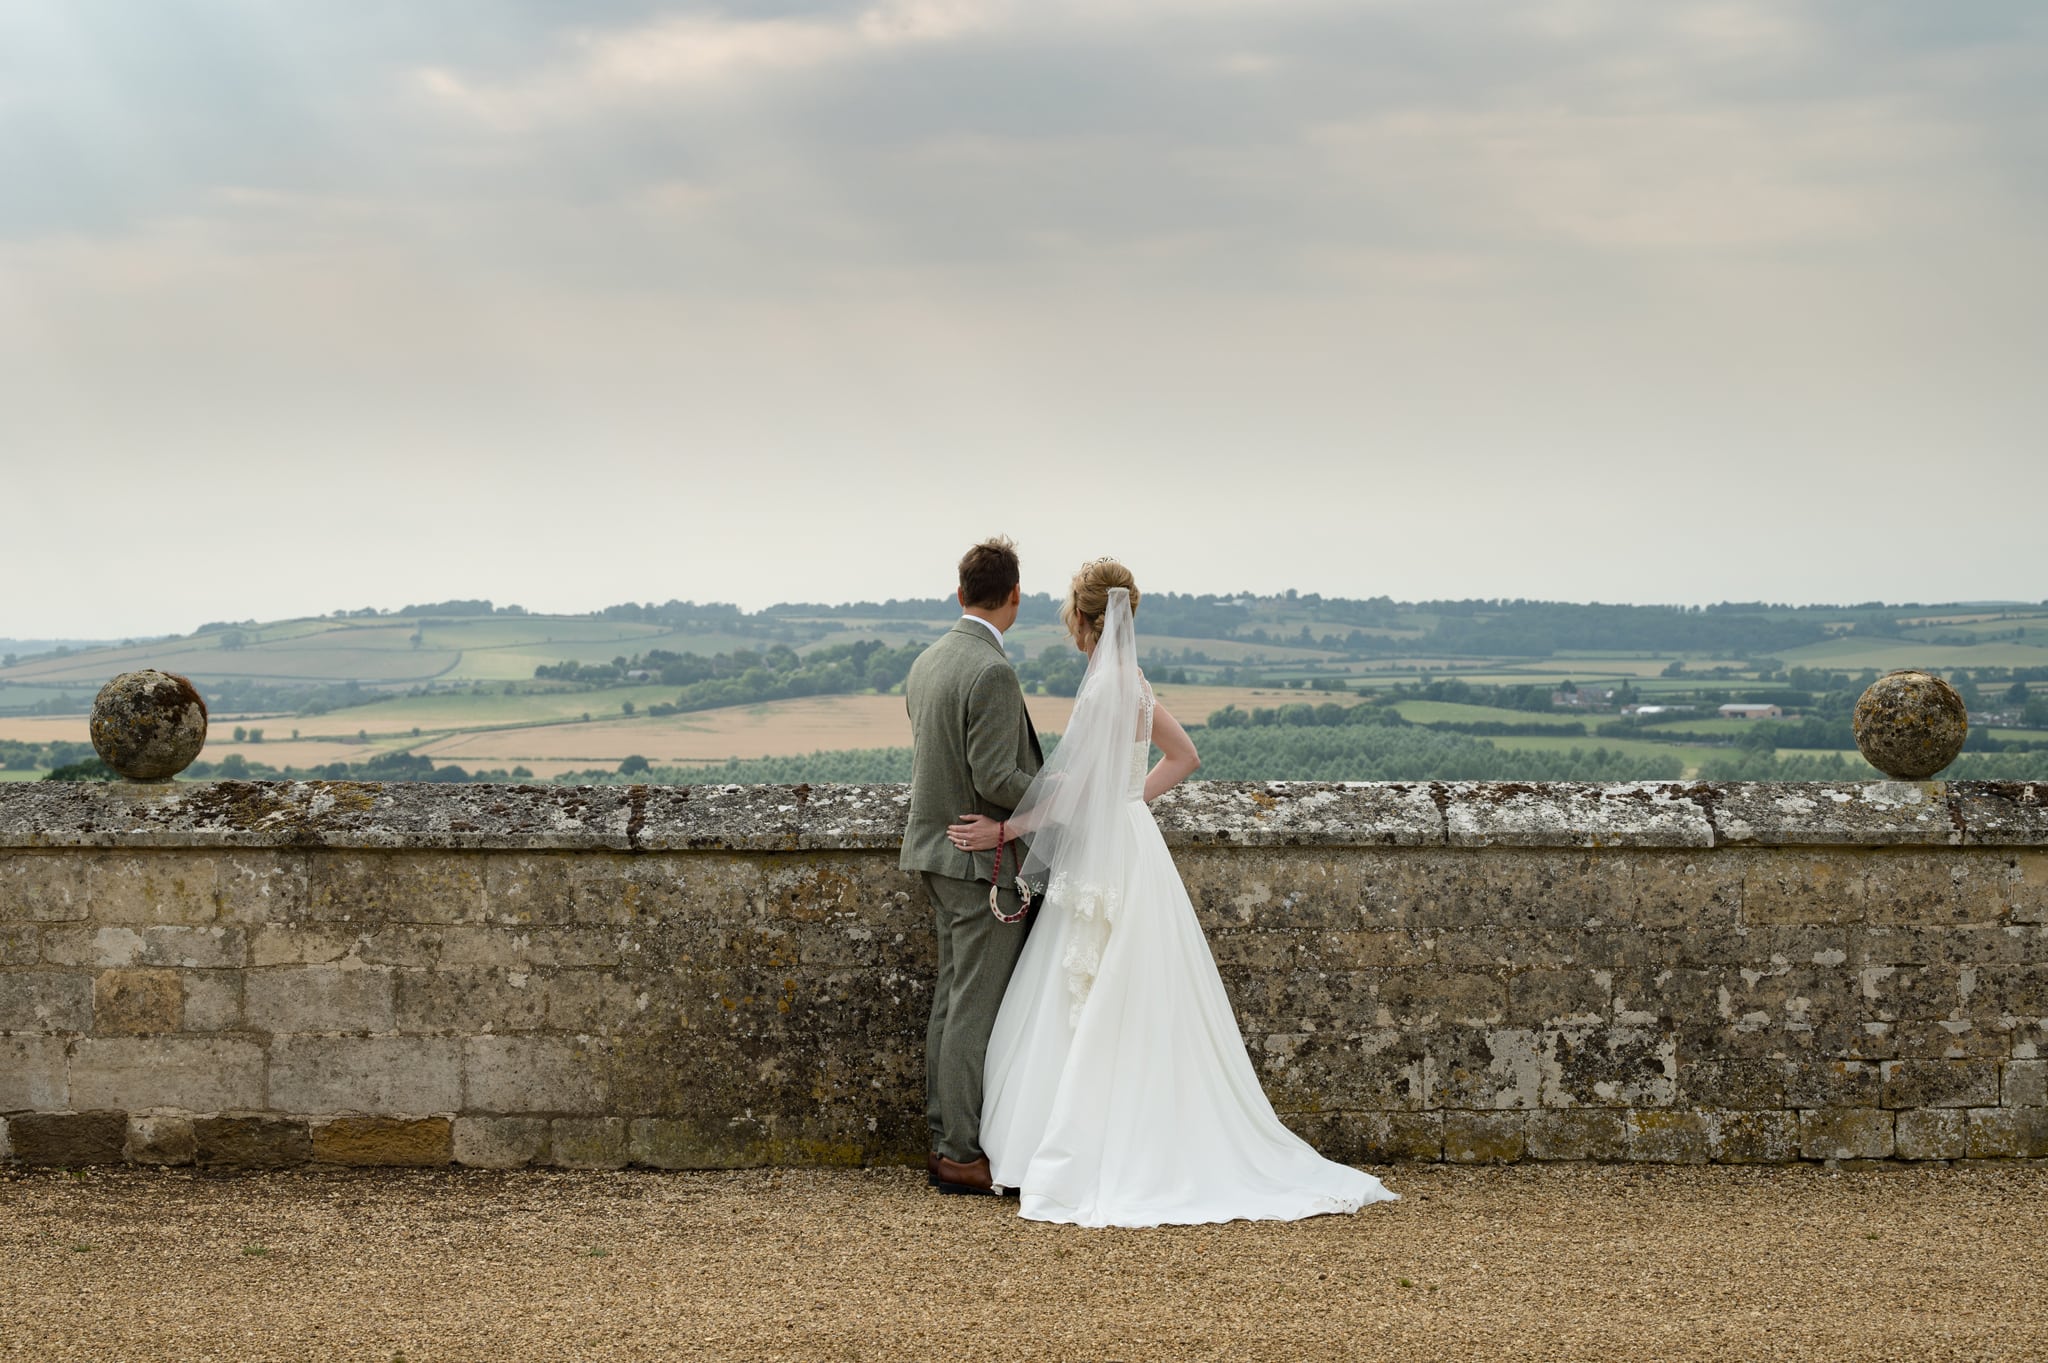 Bride and groom looking out over the Welland Valley from the ramparts at Rockingham Castle